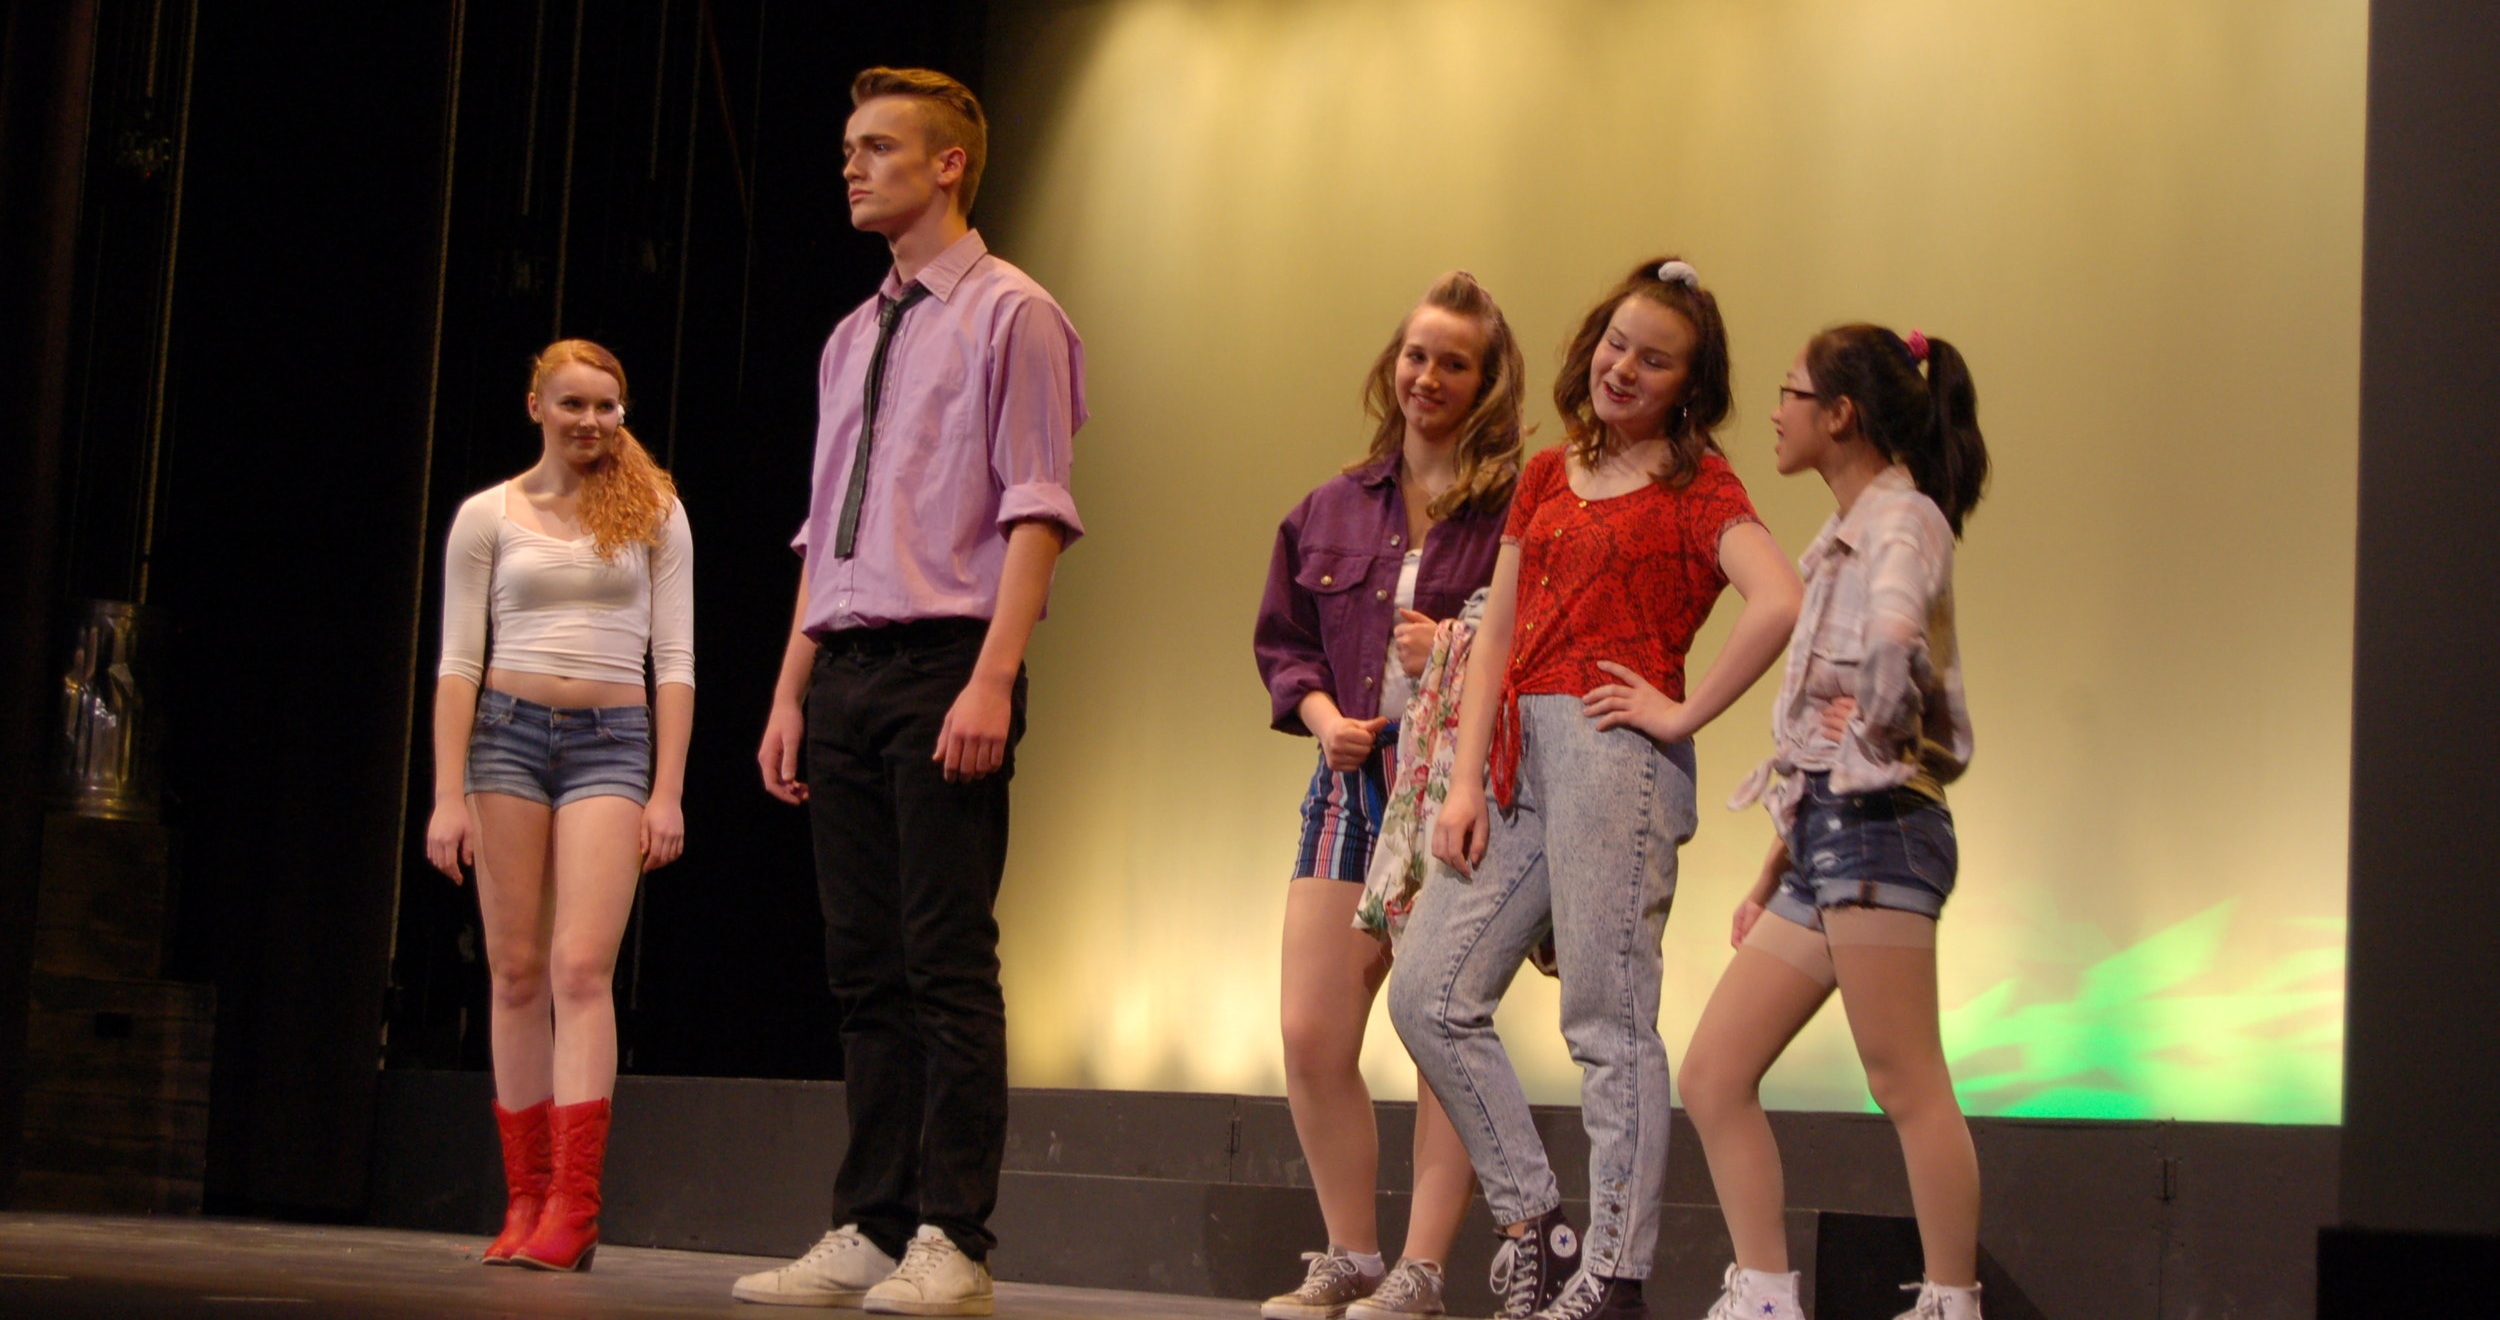   From left, Ariel, played by Sophia Martin, Ren, played by Noah Cordes, Rusty, played by Stephanie Fortune, Urleen played by Lily St. Onge, and Wendy Jo played by Meika Nadeau.  